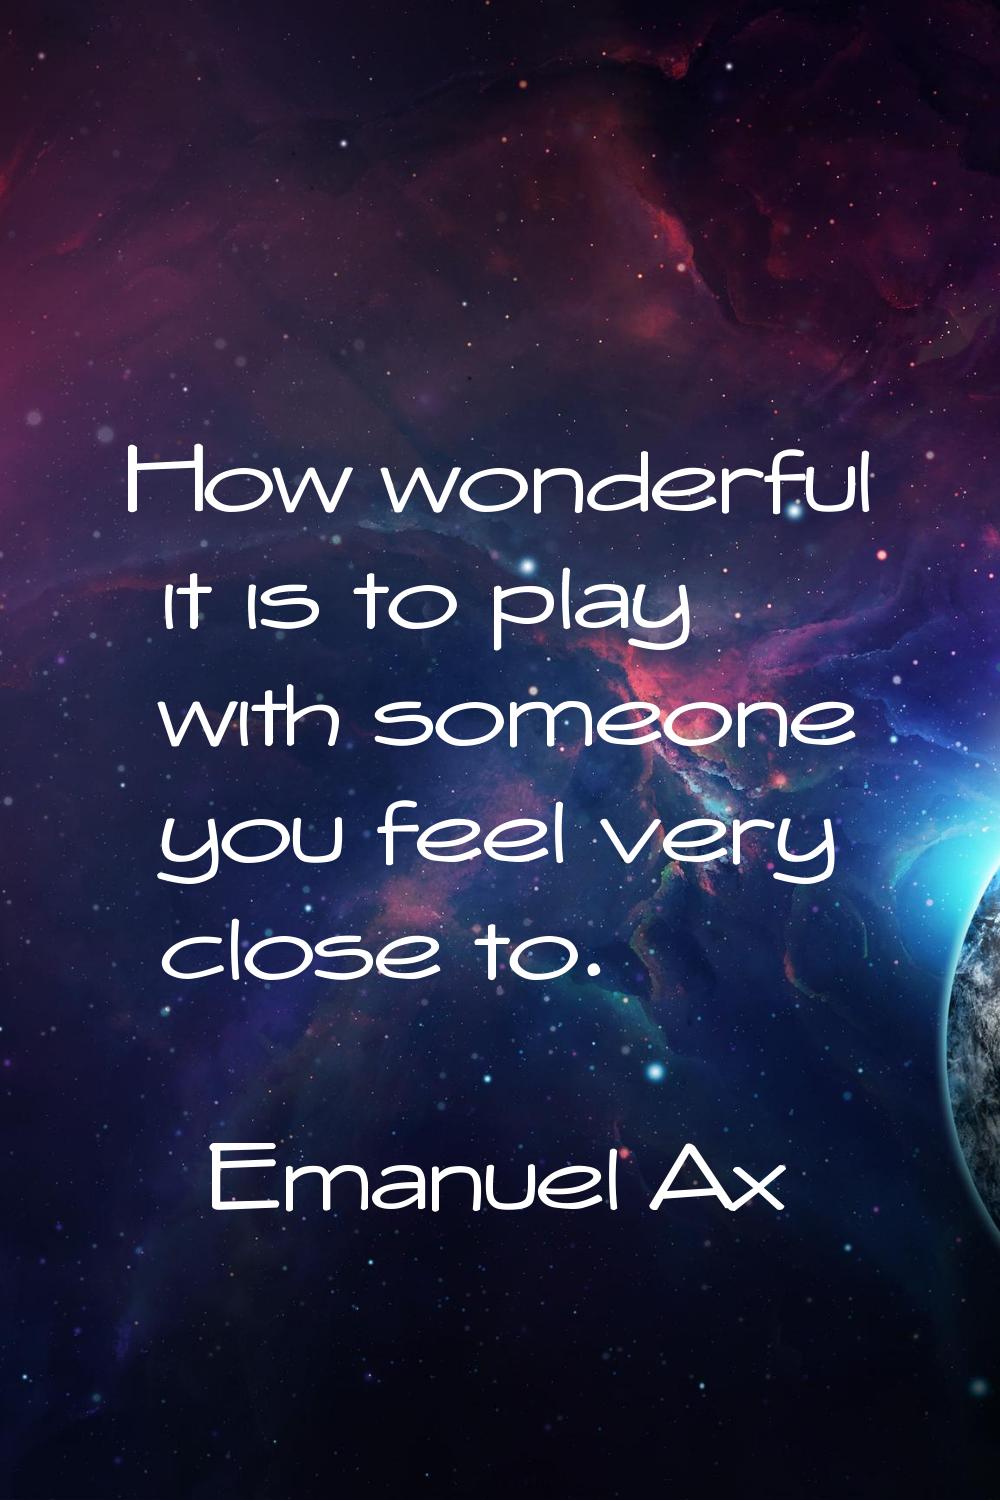 How wonderful it is to play with someone you feel very close to.